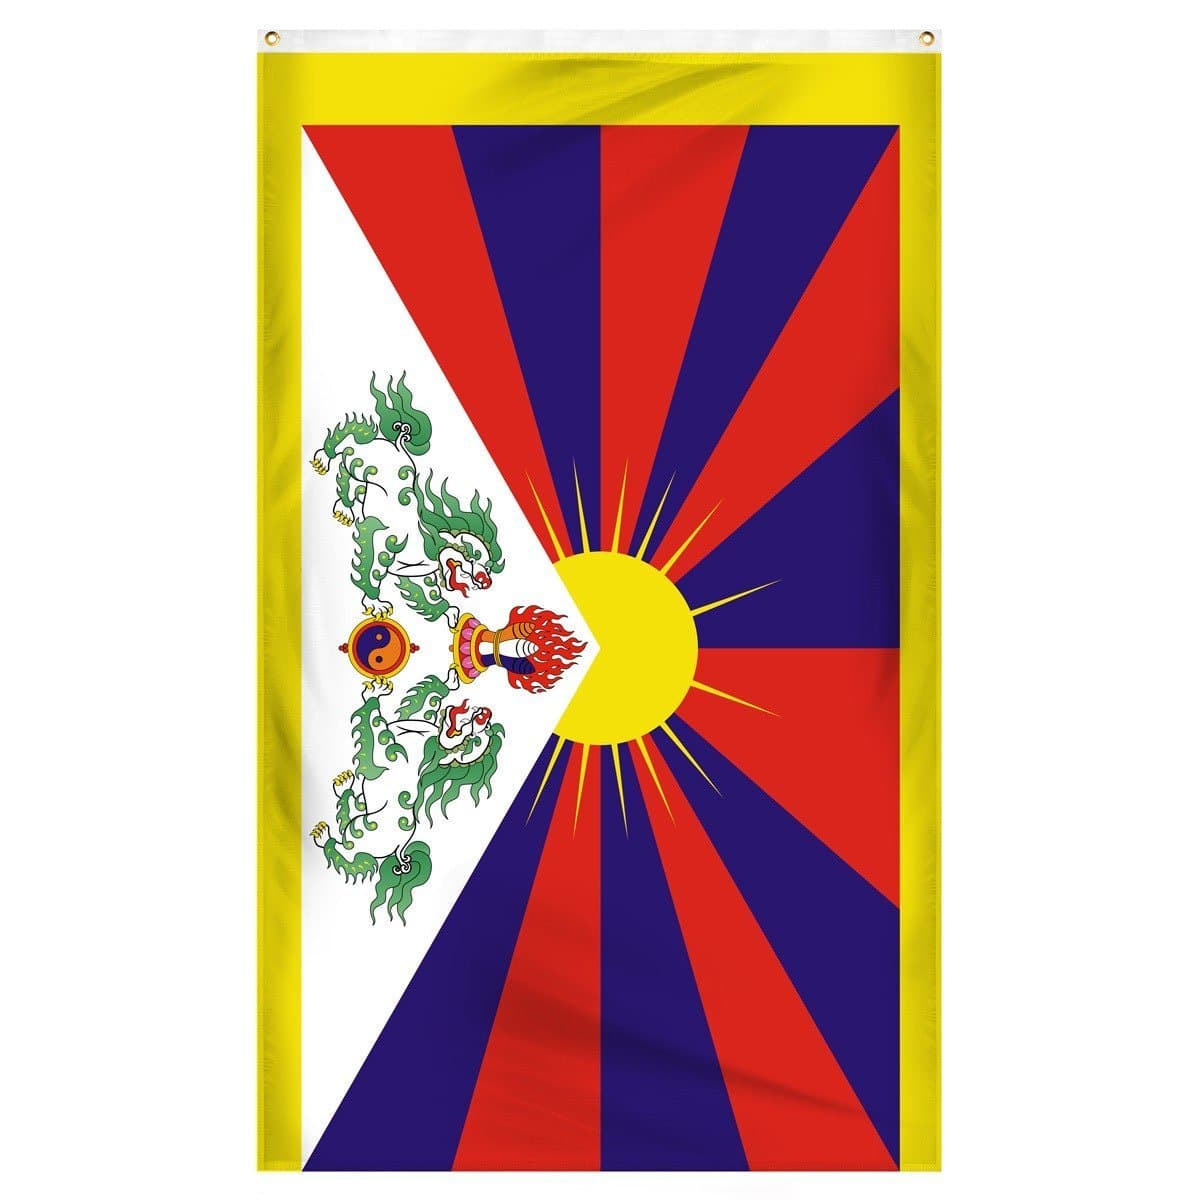 Tibet National Flag for sale to buy online from Atlantic Flag and Pole. Red and purple sunrise on a flag with dragons.